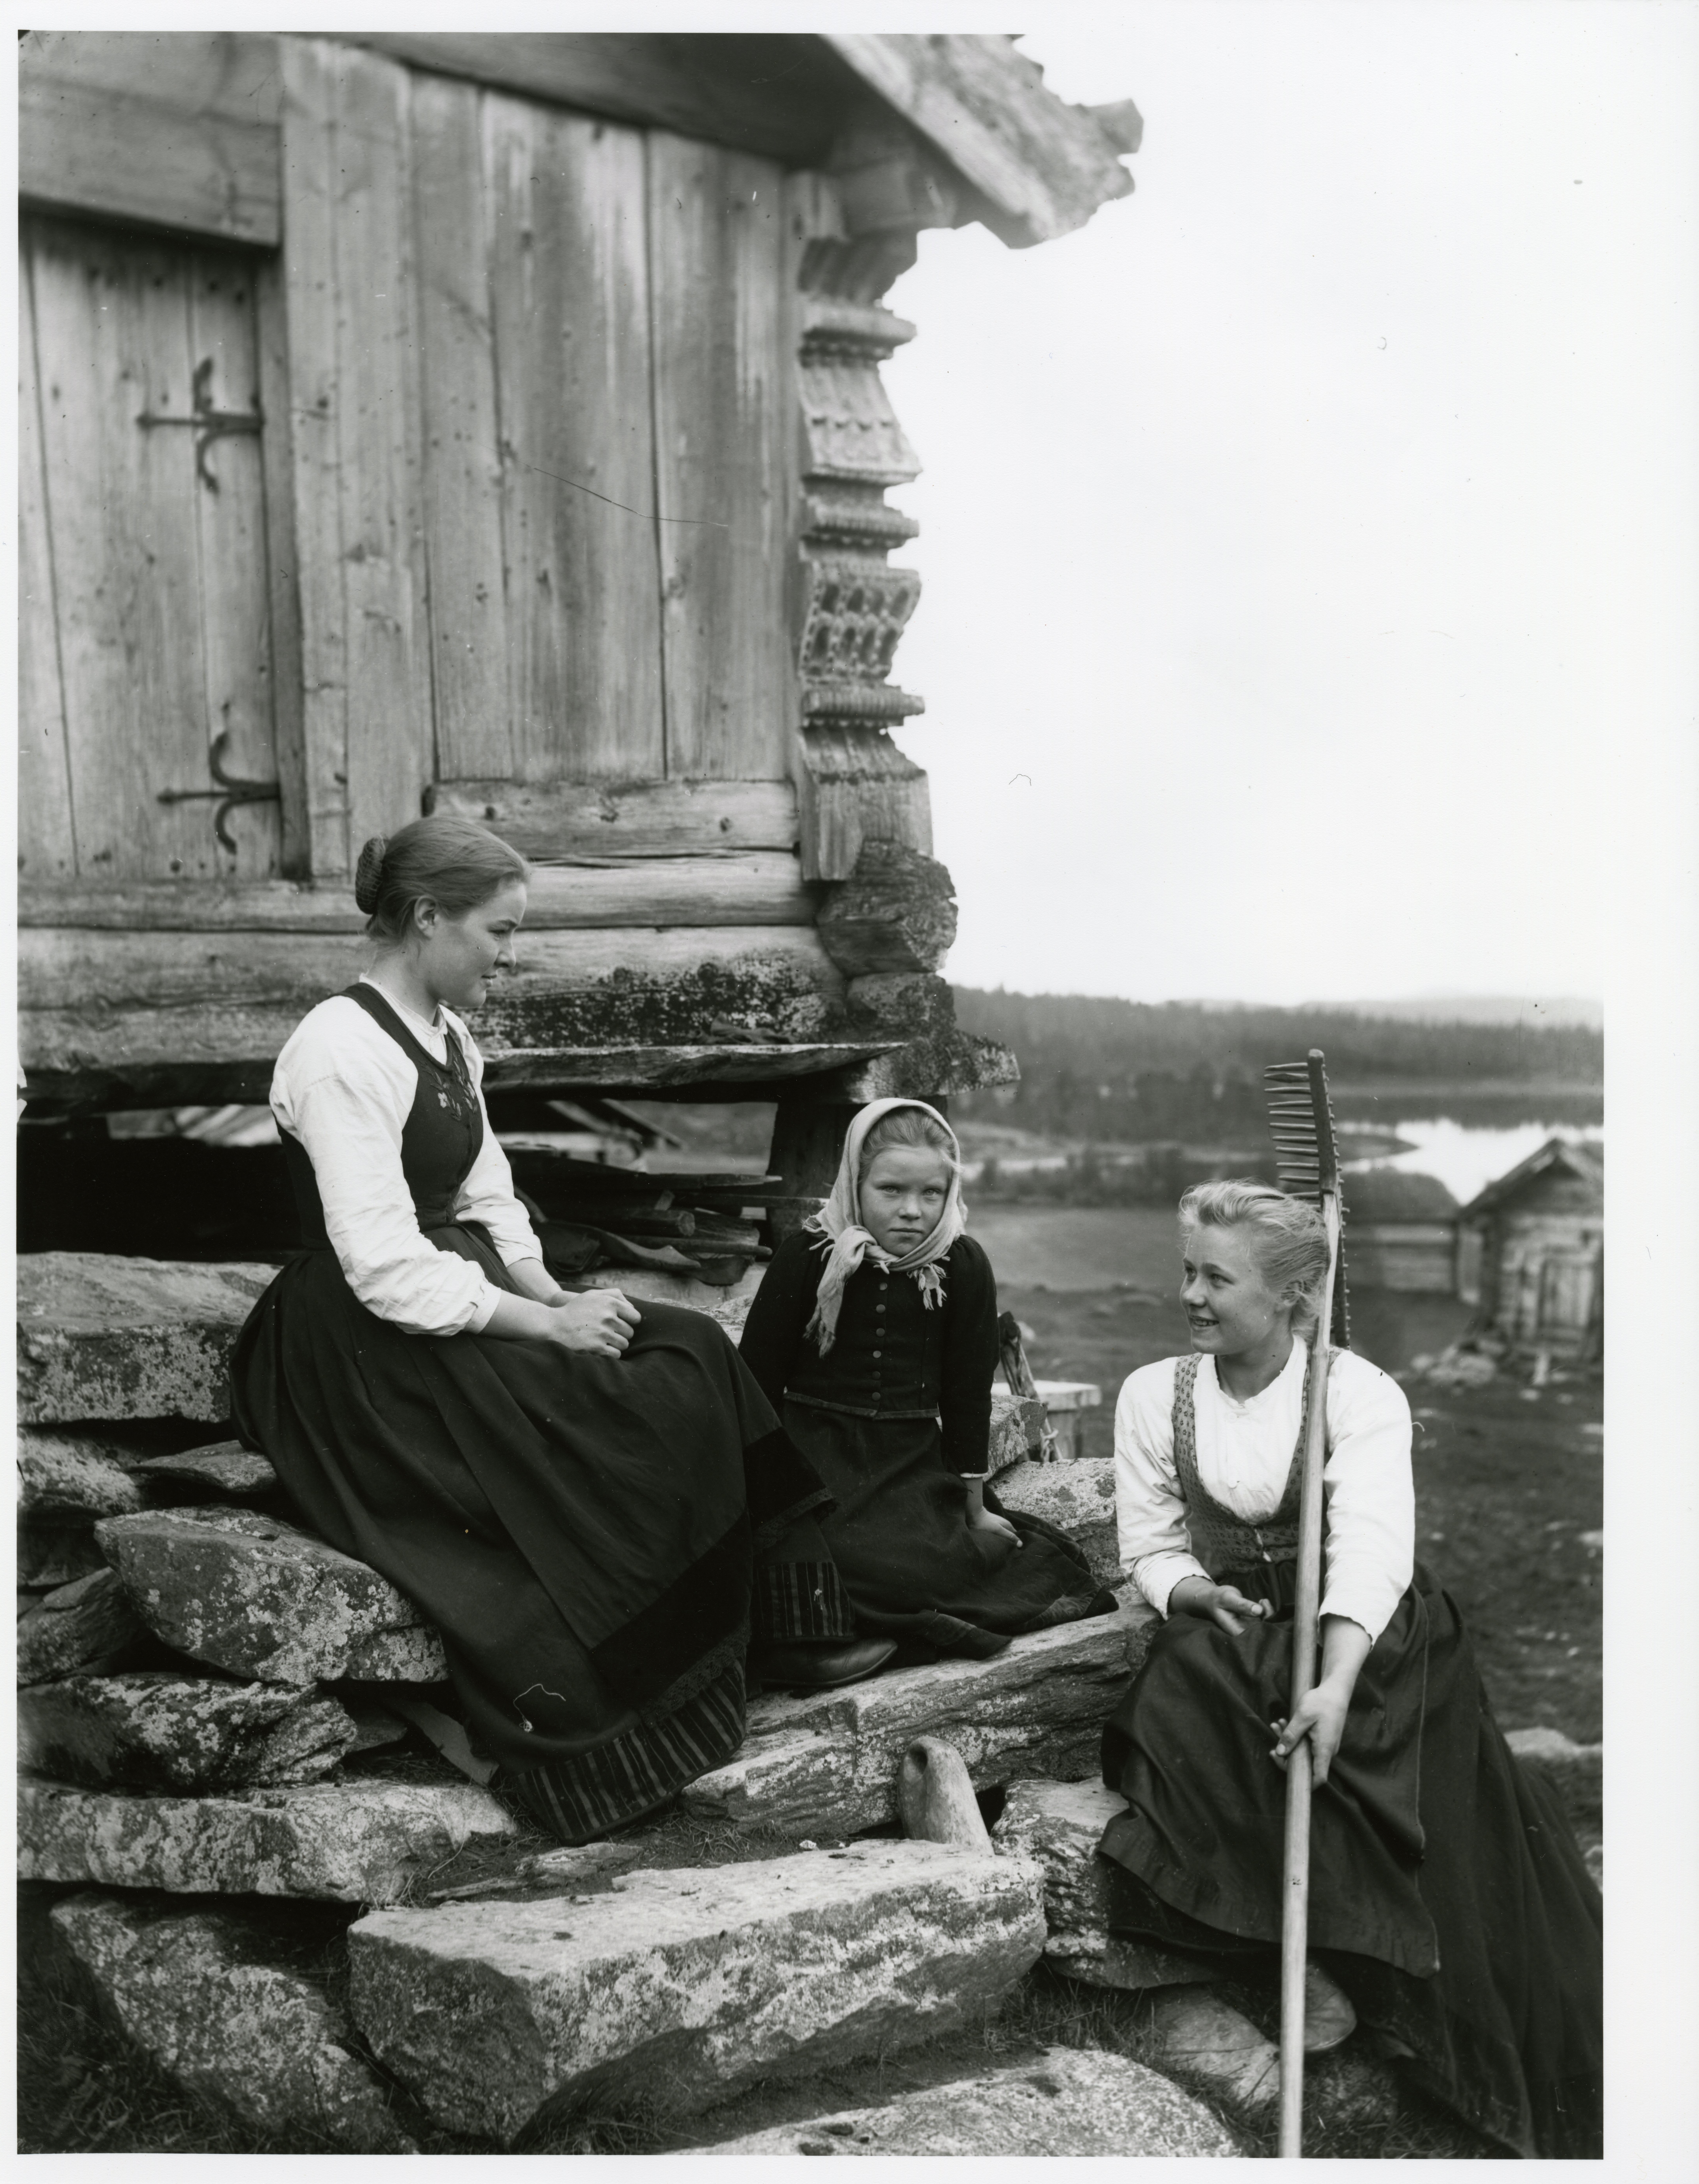 Three woman sit on rock stairs, in nice dress and one holding rake.